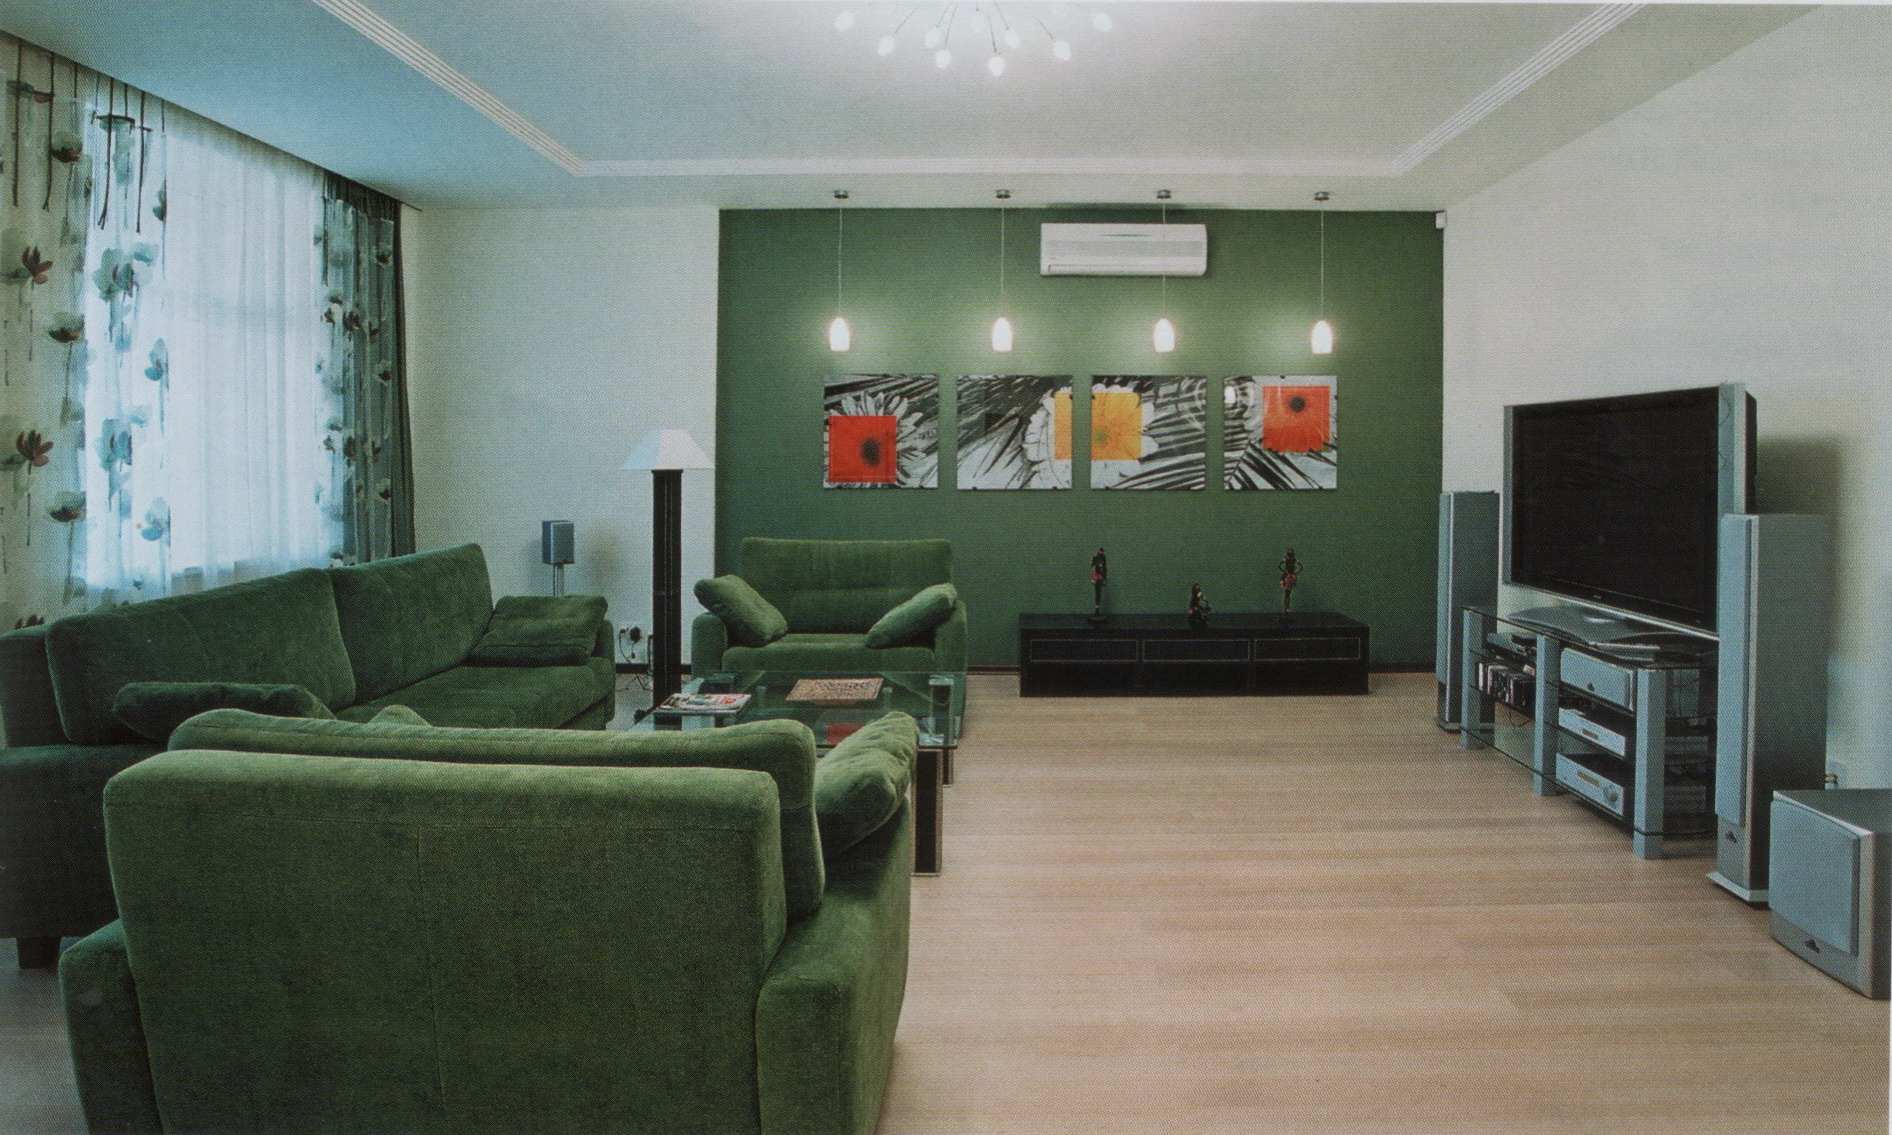 Green Living Interior Small Green Living Room Design Interior Using Fabric Sofa And Minimalist TV Cabinet Design Ideas Living Room Green Living Room That Bringing Nature Right Into Your Home